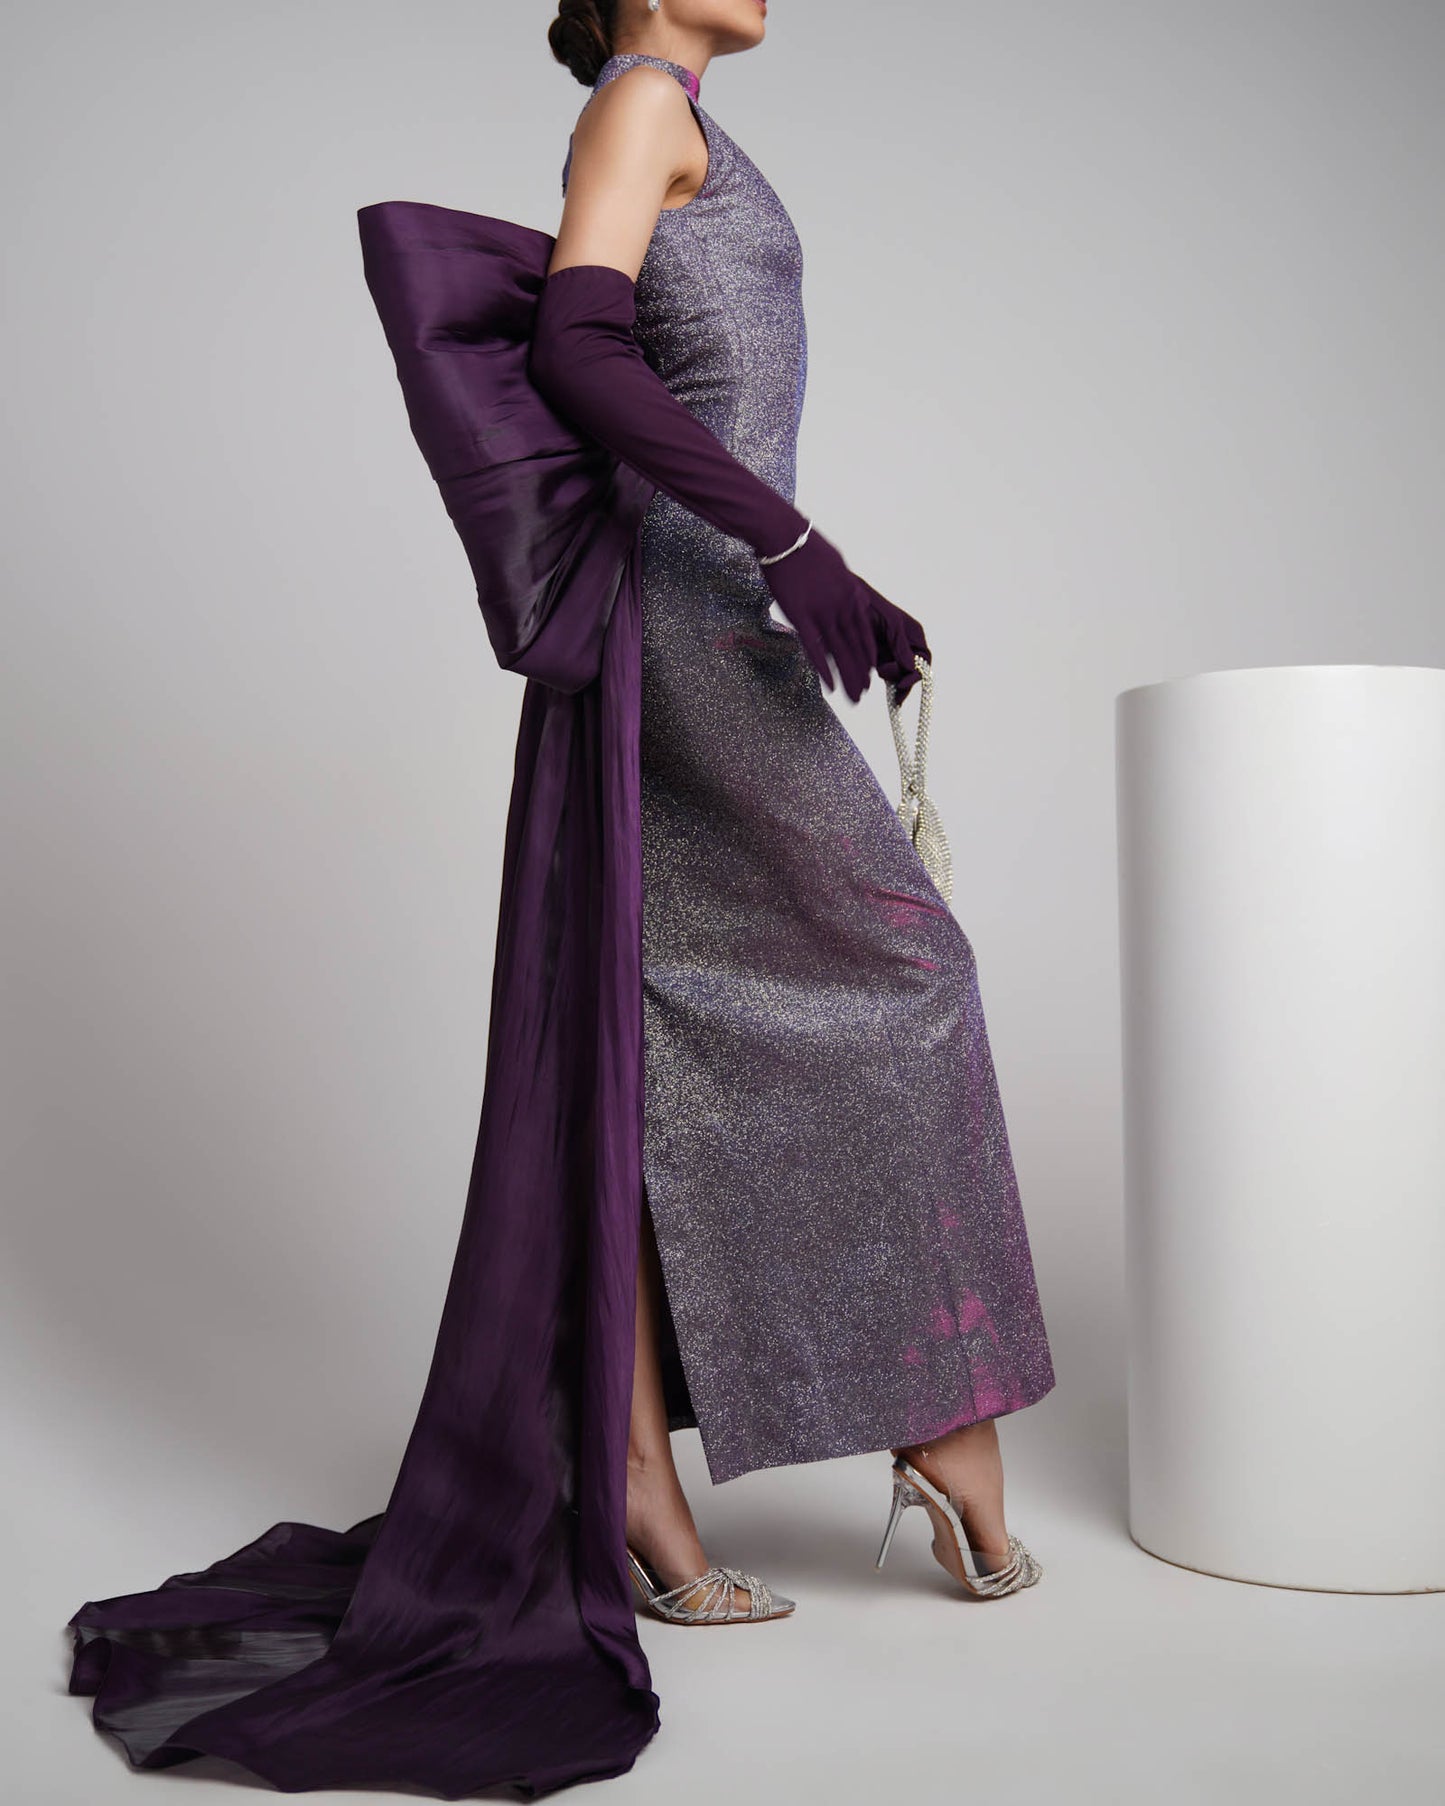 Mermaid purple metallic gown with bow detail